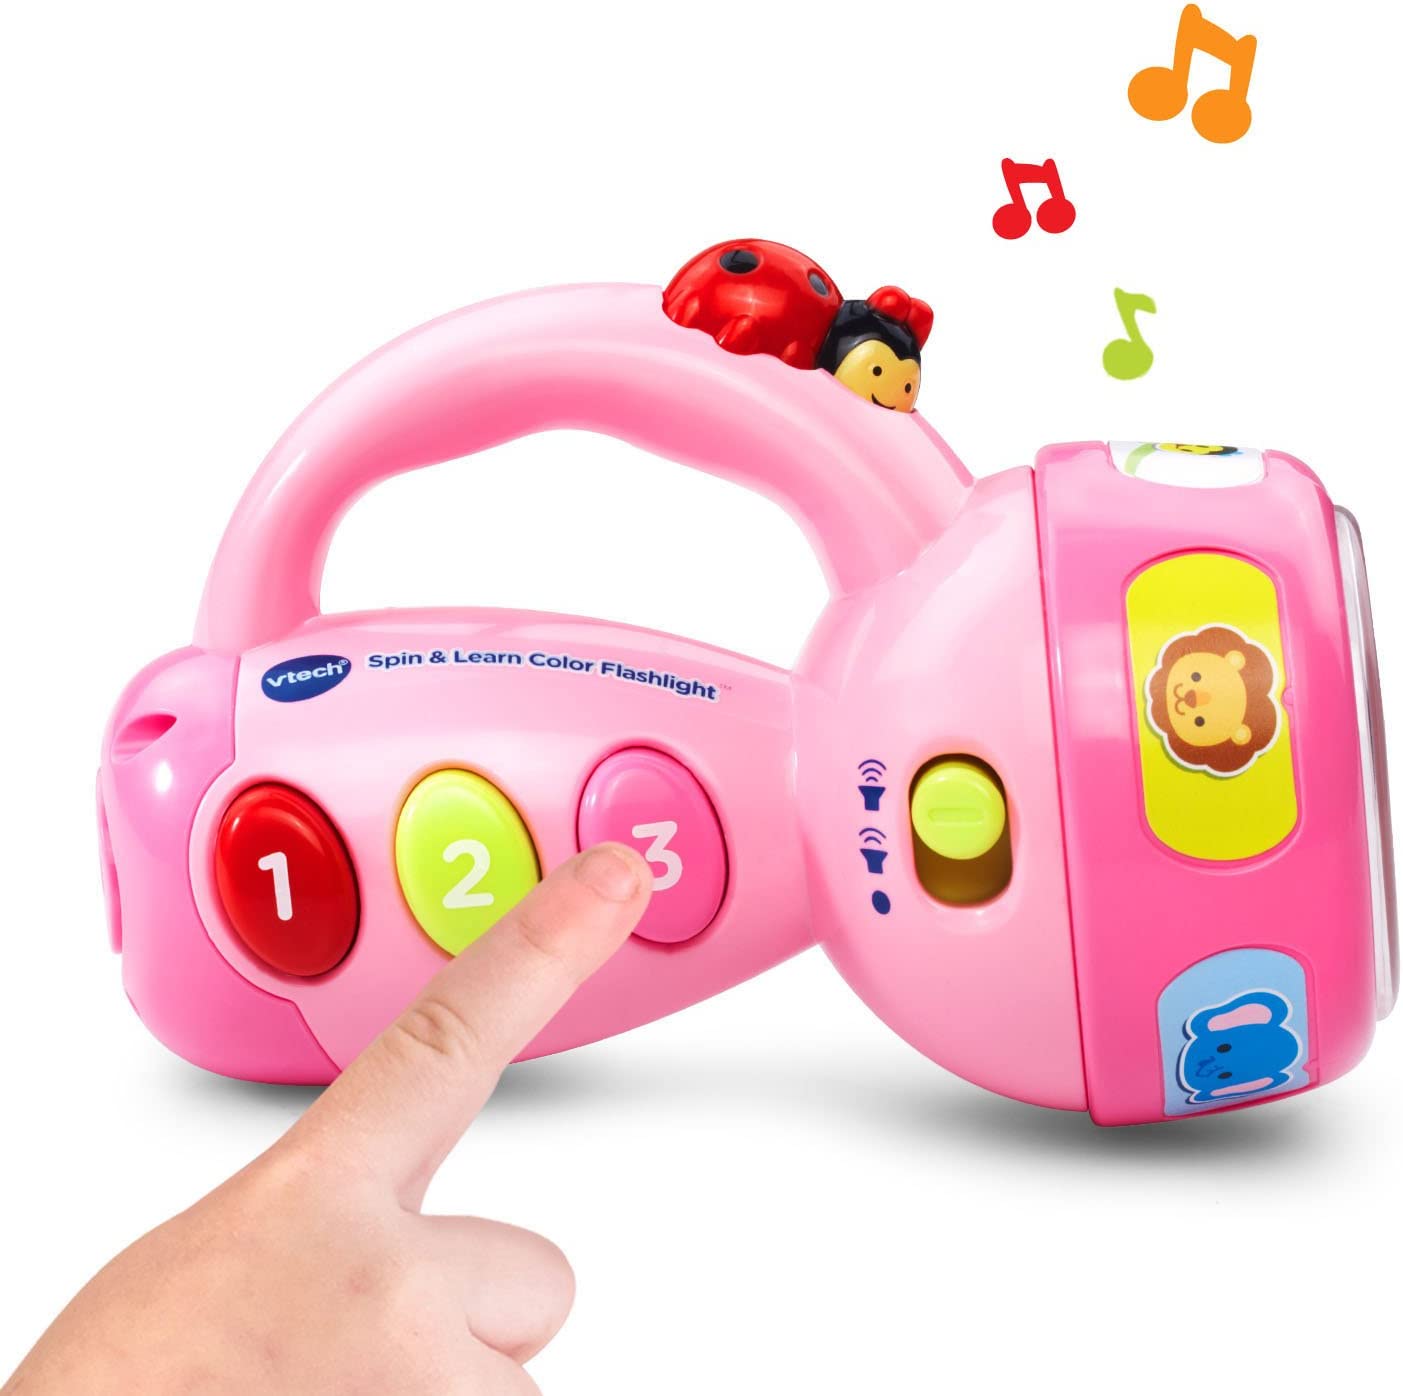 VTech Spin and Learn Color Flashlight, Pink - for Infants and Toddlers Ages 1 to 3 Years